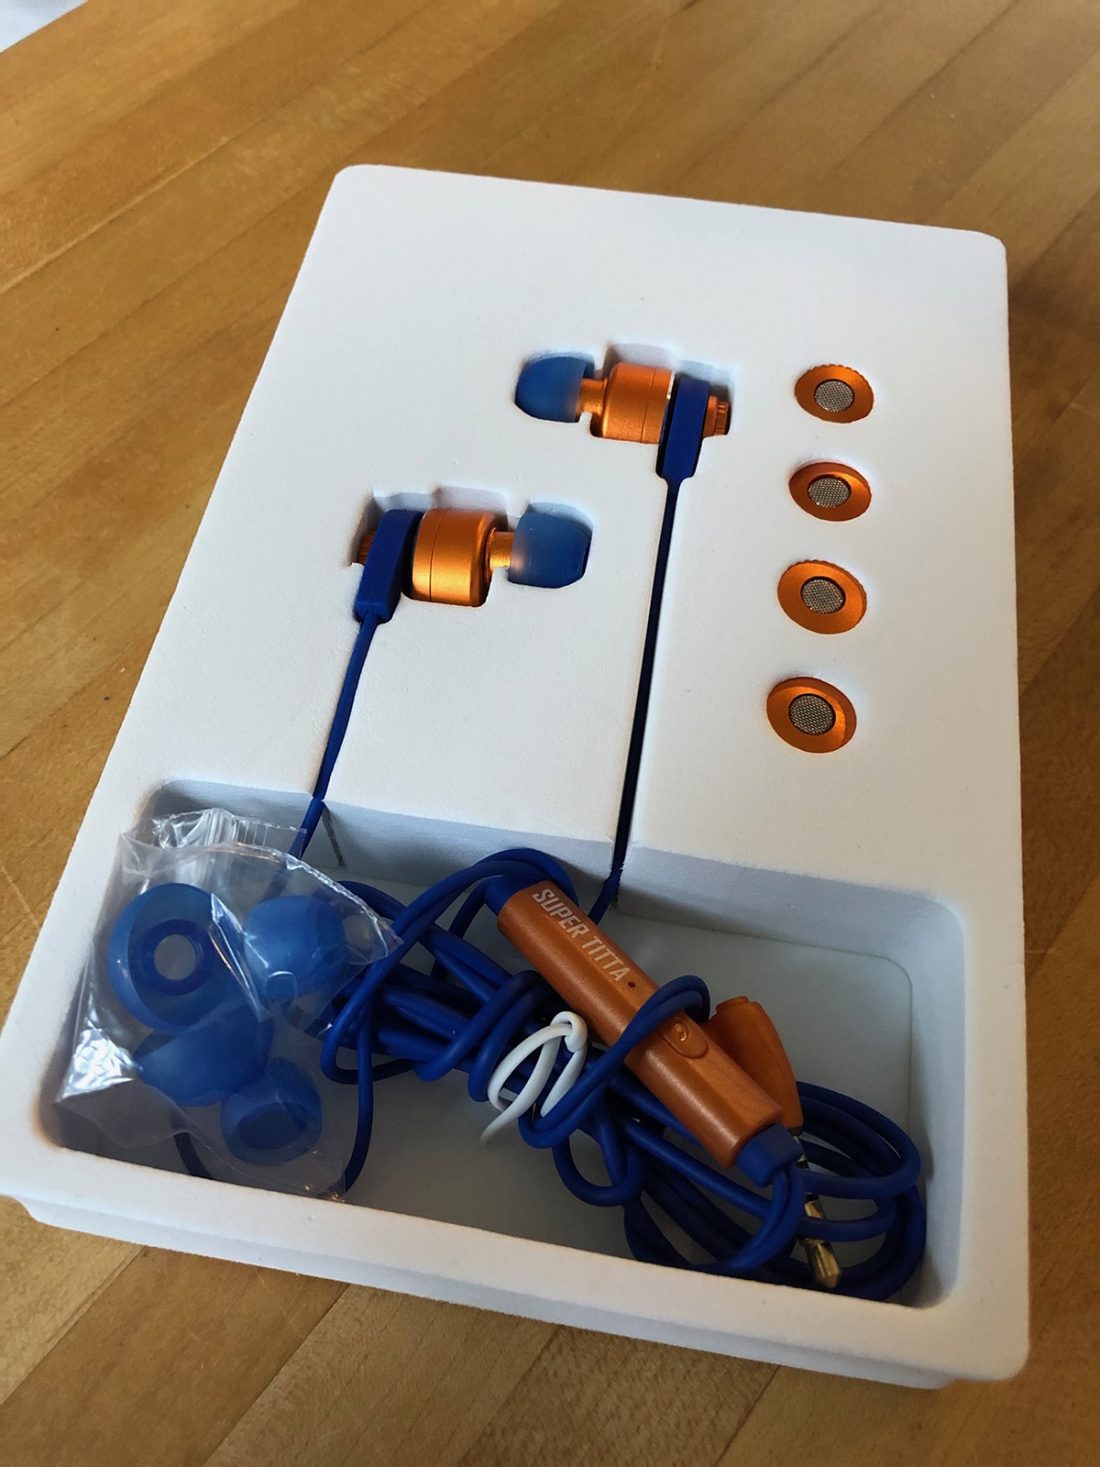 Review Carot One Titta And Super Titta Iems Comparisons Headphonesty